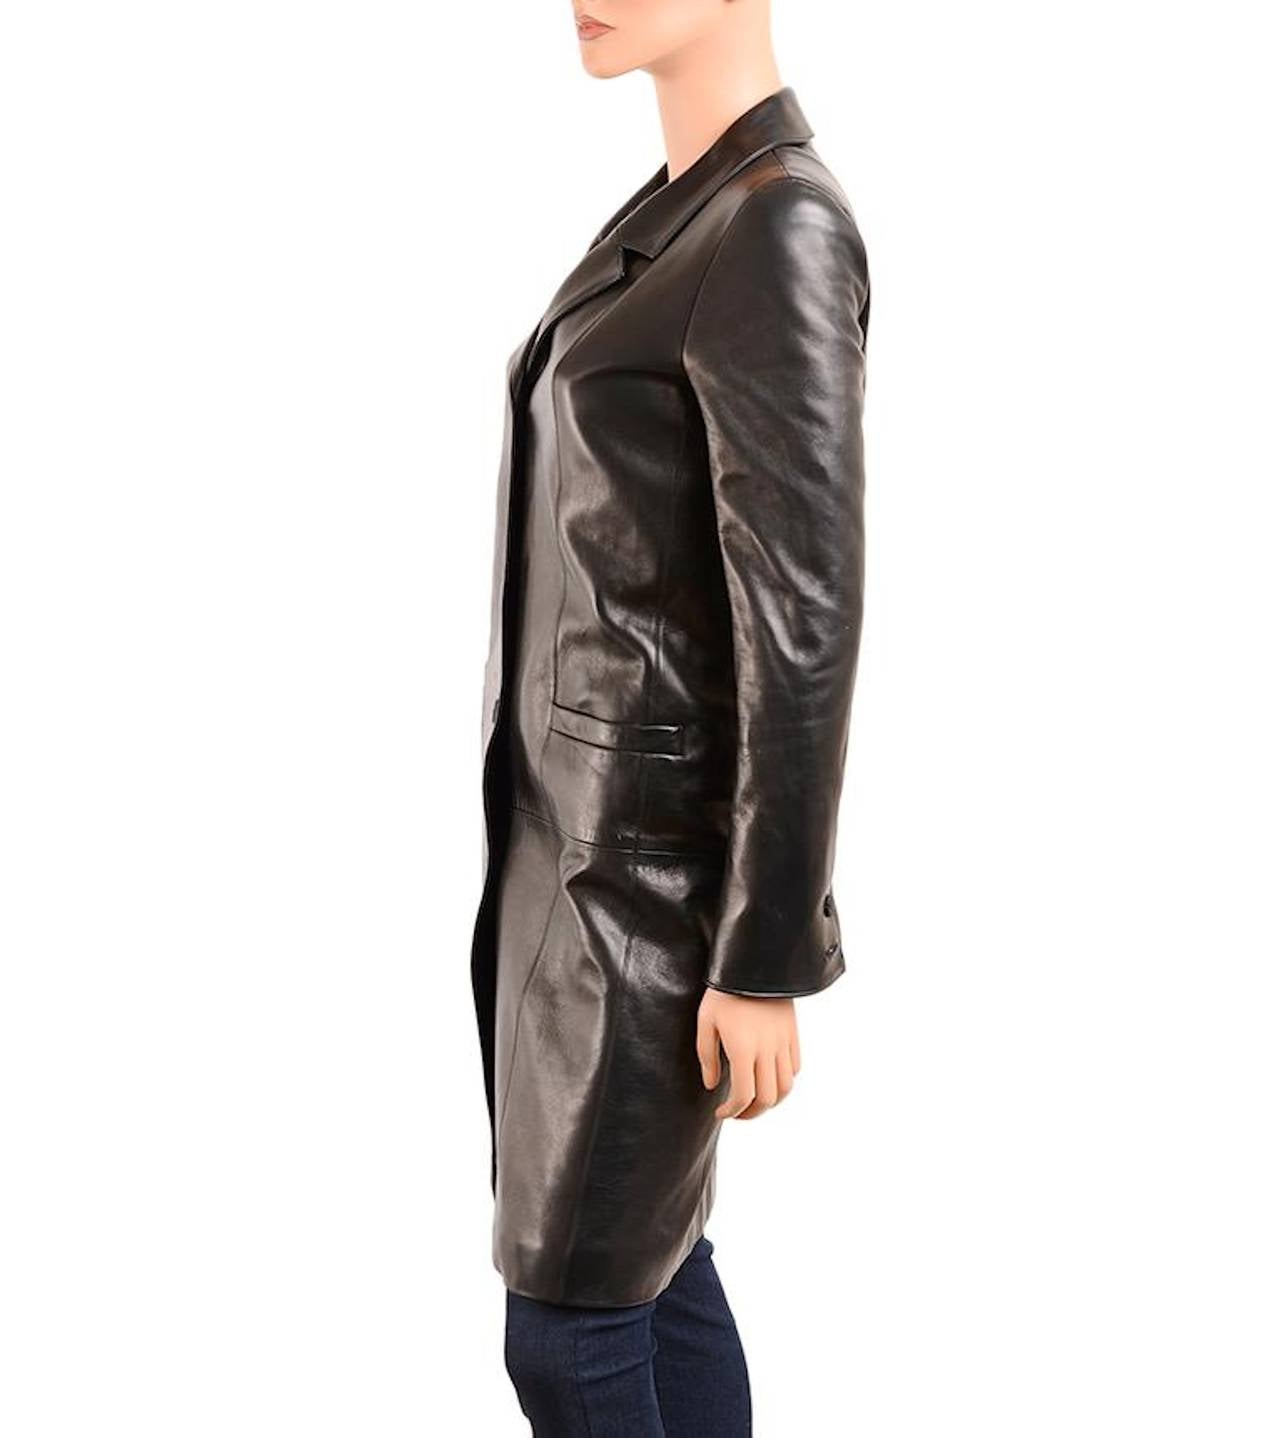 Chanel timeless lambskin leather coat with notched collar with lapels, four black CC sunburst button closure, two patch pockets, panel detail, long sleeves with two buttons one each cuff and black matelasse quilted silk lining.

Collection: